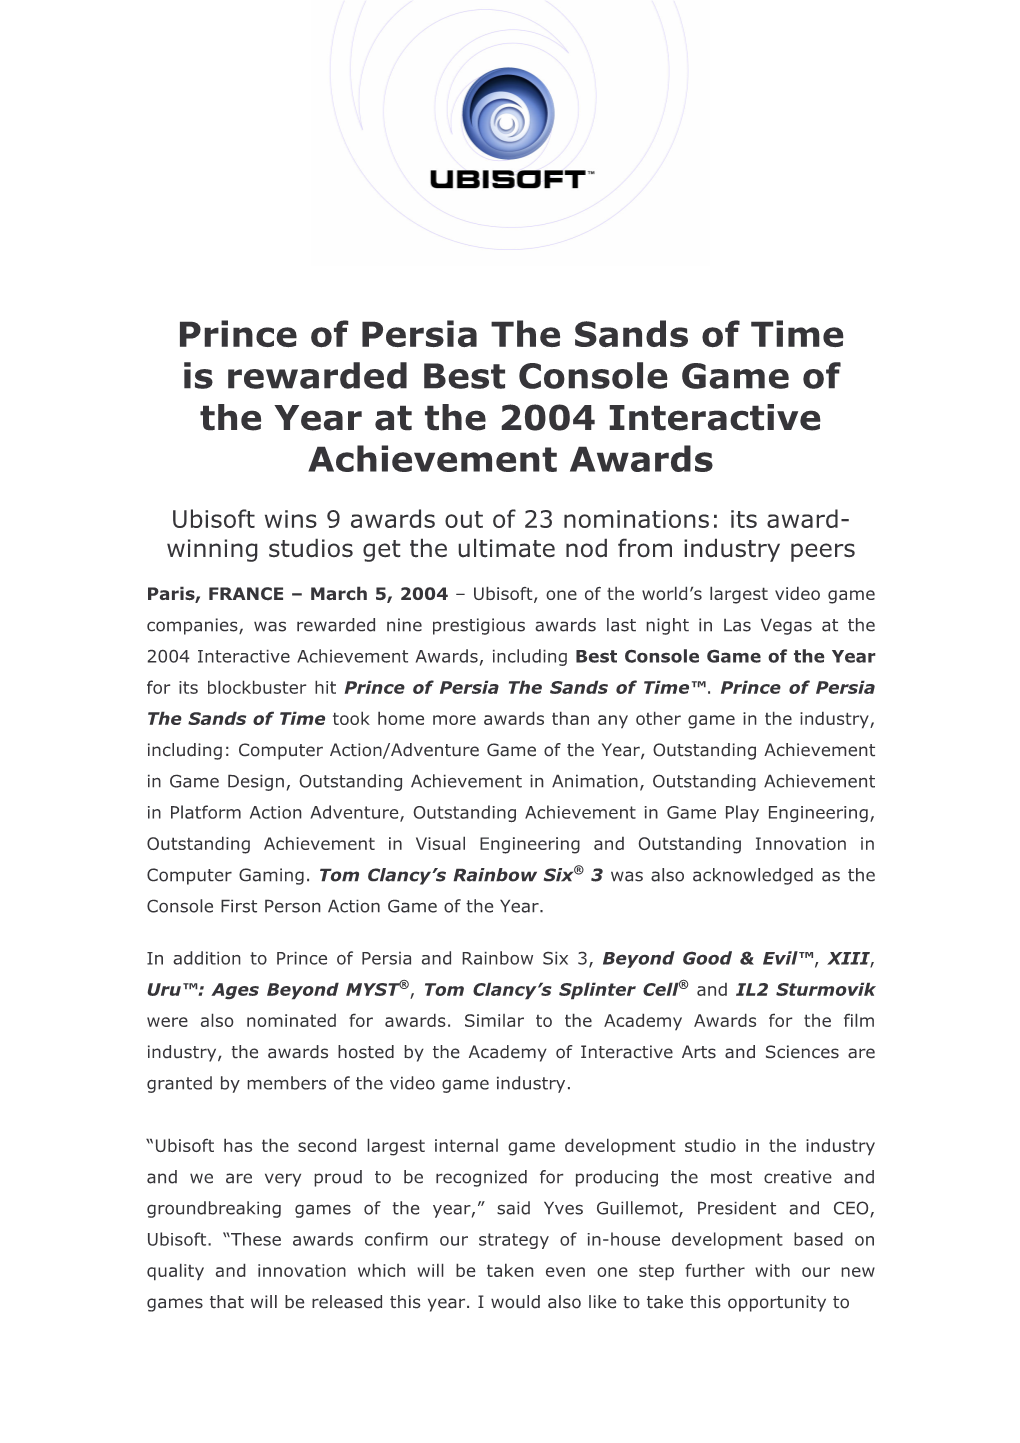 Prince of Persia the Sands of Time Is Rewarded Best Console Game of the Year at the 2004 Interactive Achievement Awards